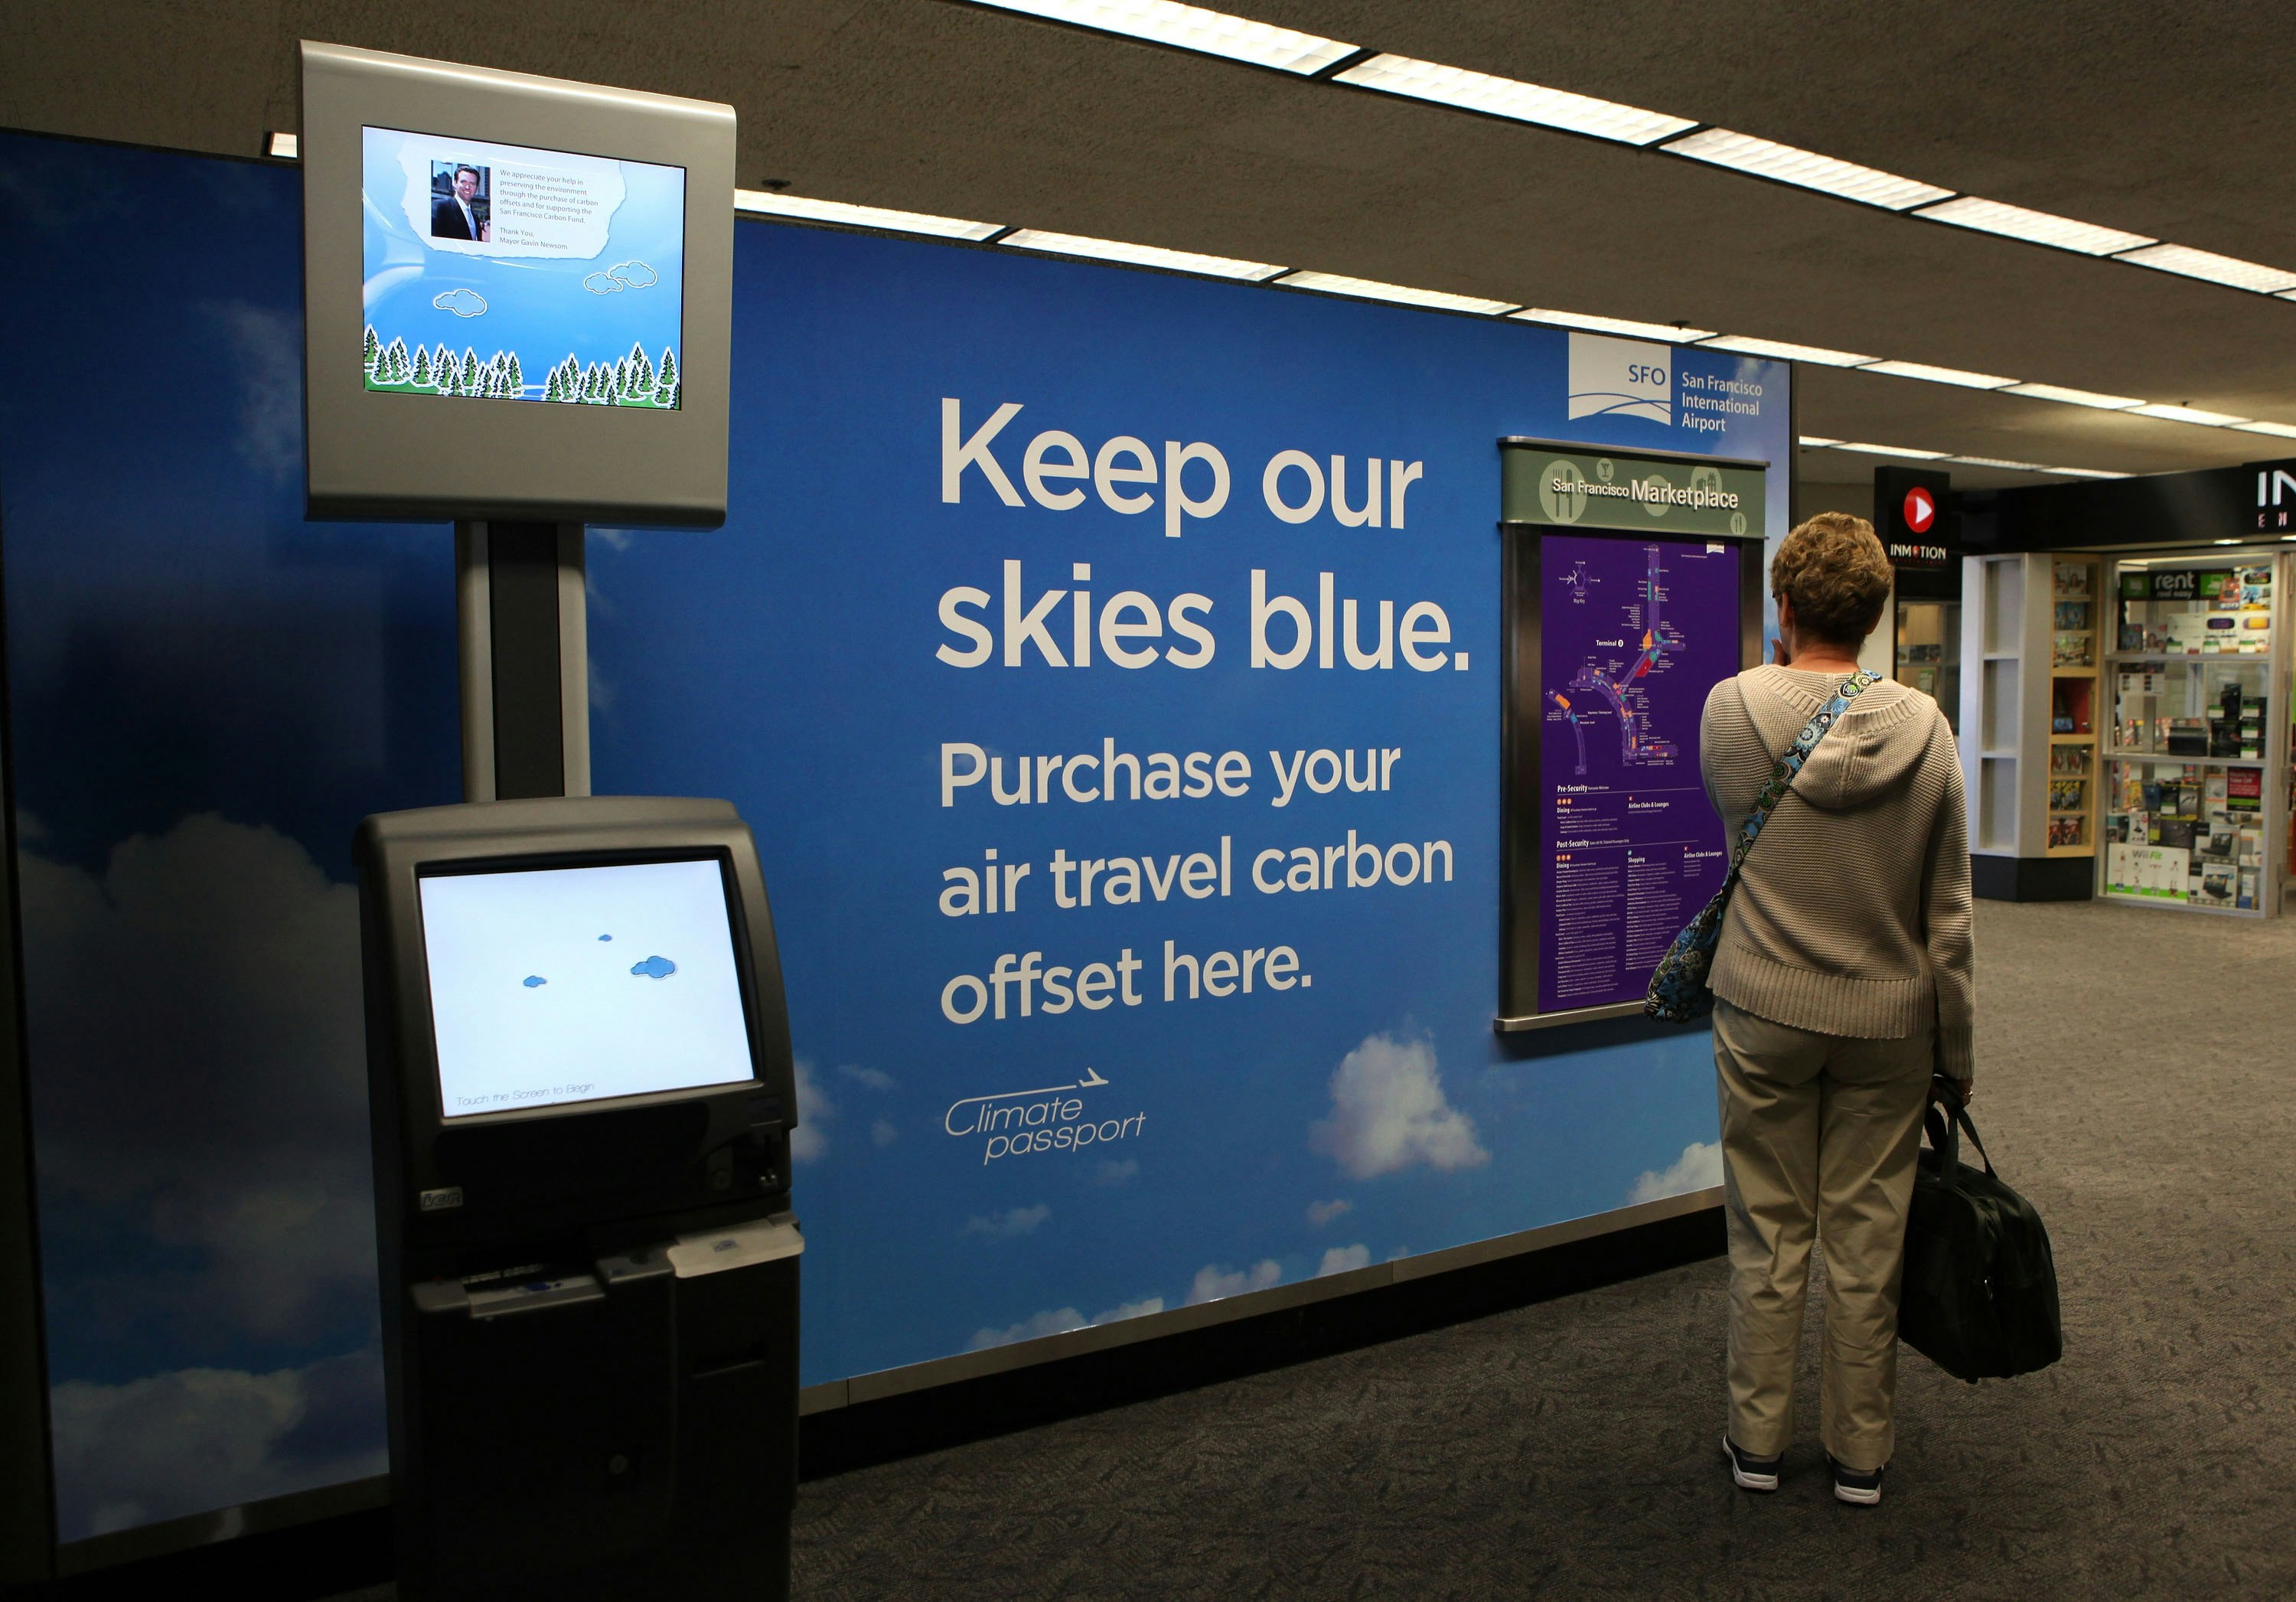 A female traveler with short blonde hair in khaki slacks and a tan sweater stands next to a carbon offset kiosk in the San Francisco International Airport. A large sign on a blue background with clouds reads "Keep our skies blue. Purchase your air travel carbon offset here" in a white san serif font  